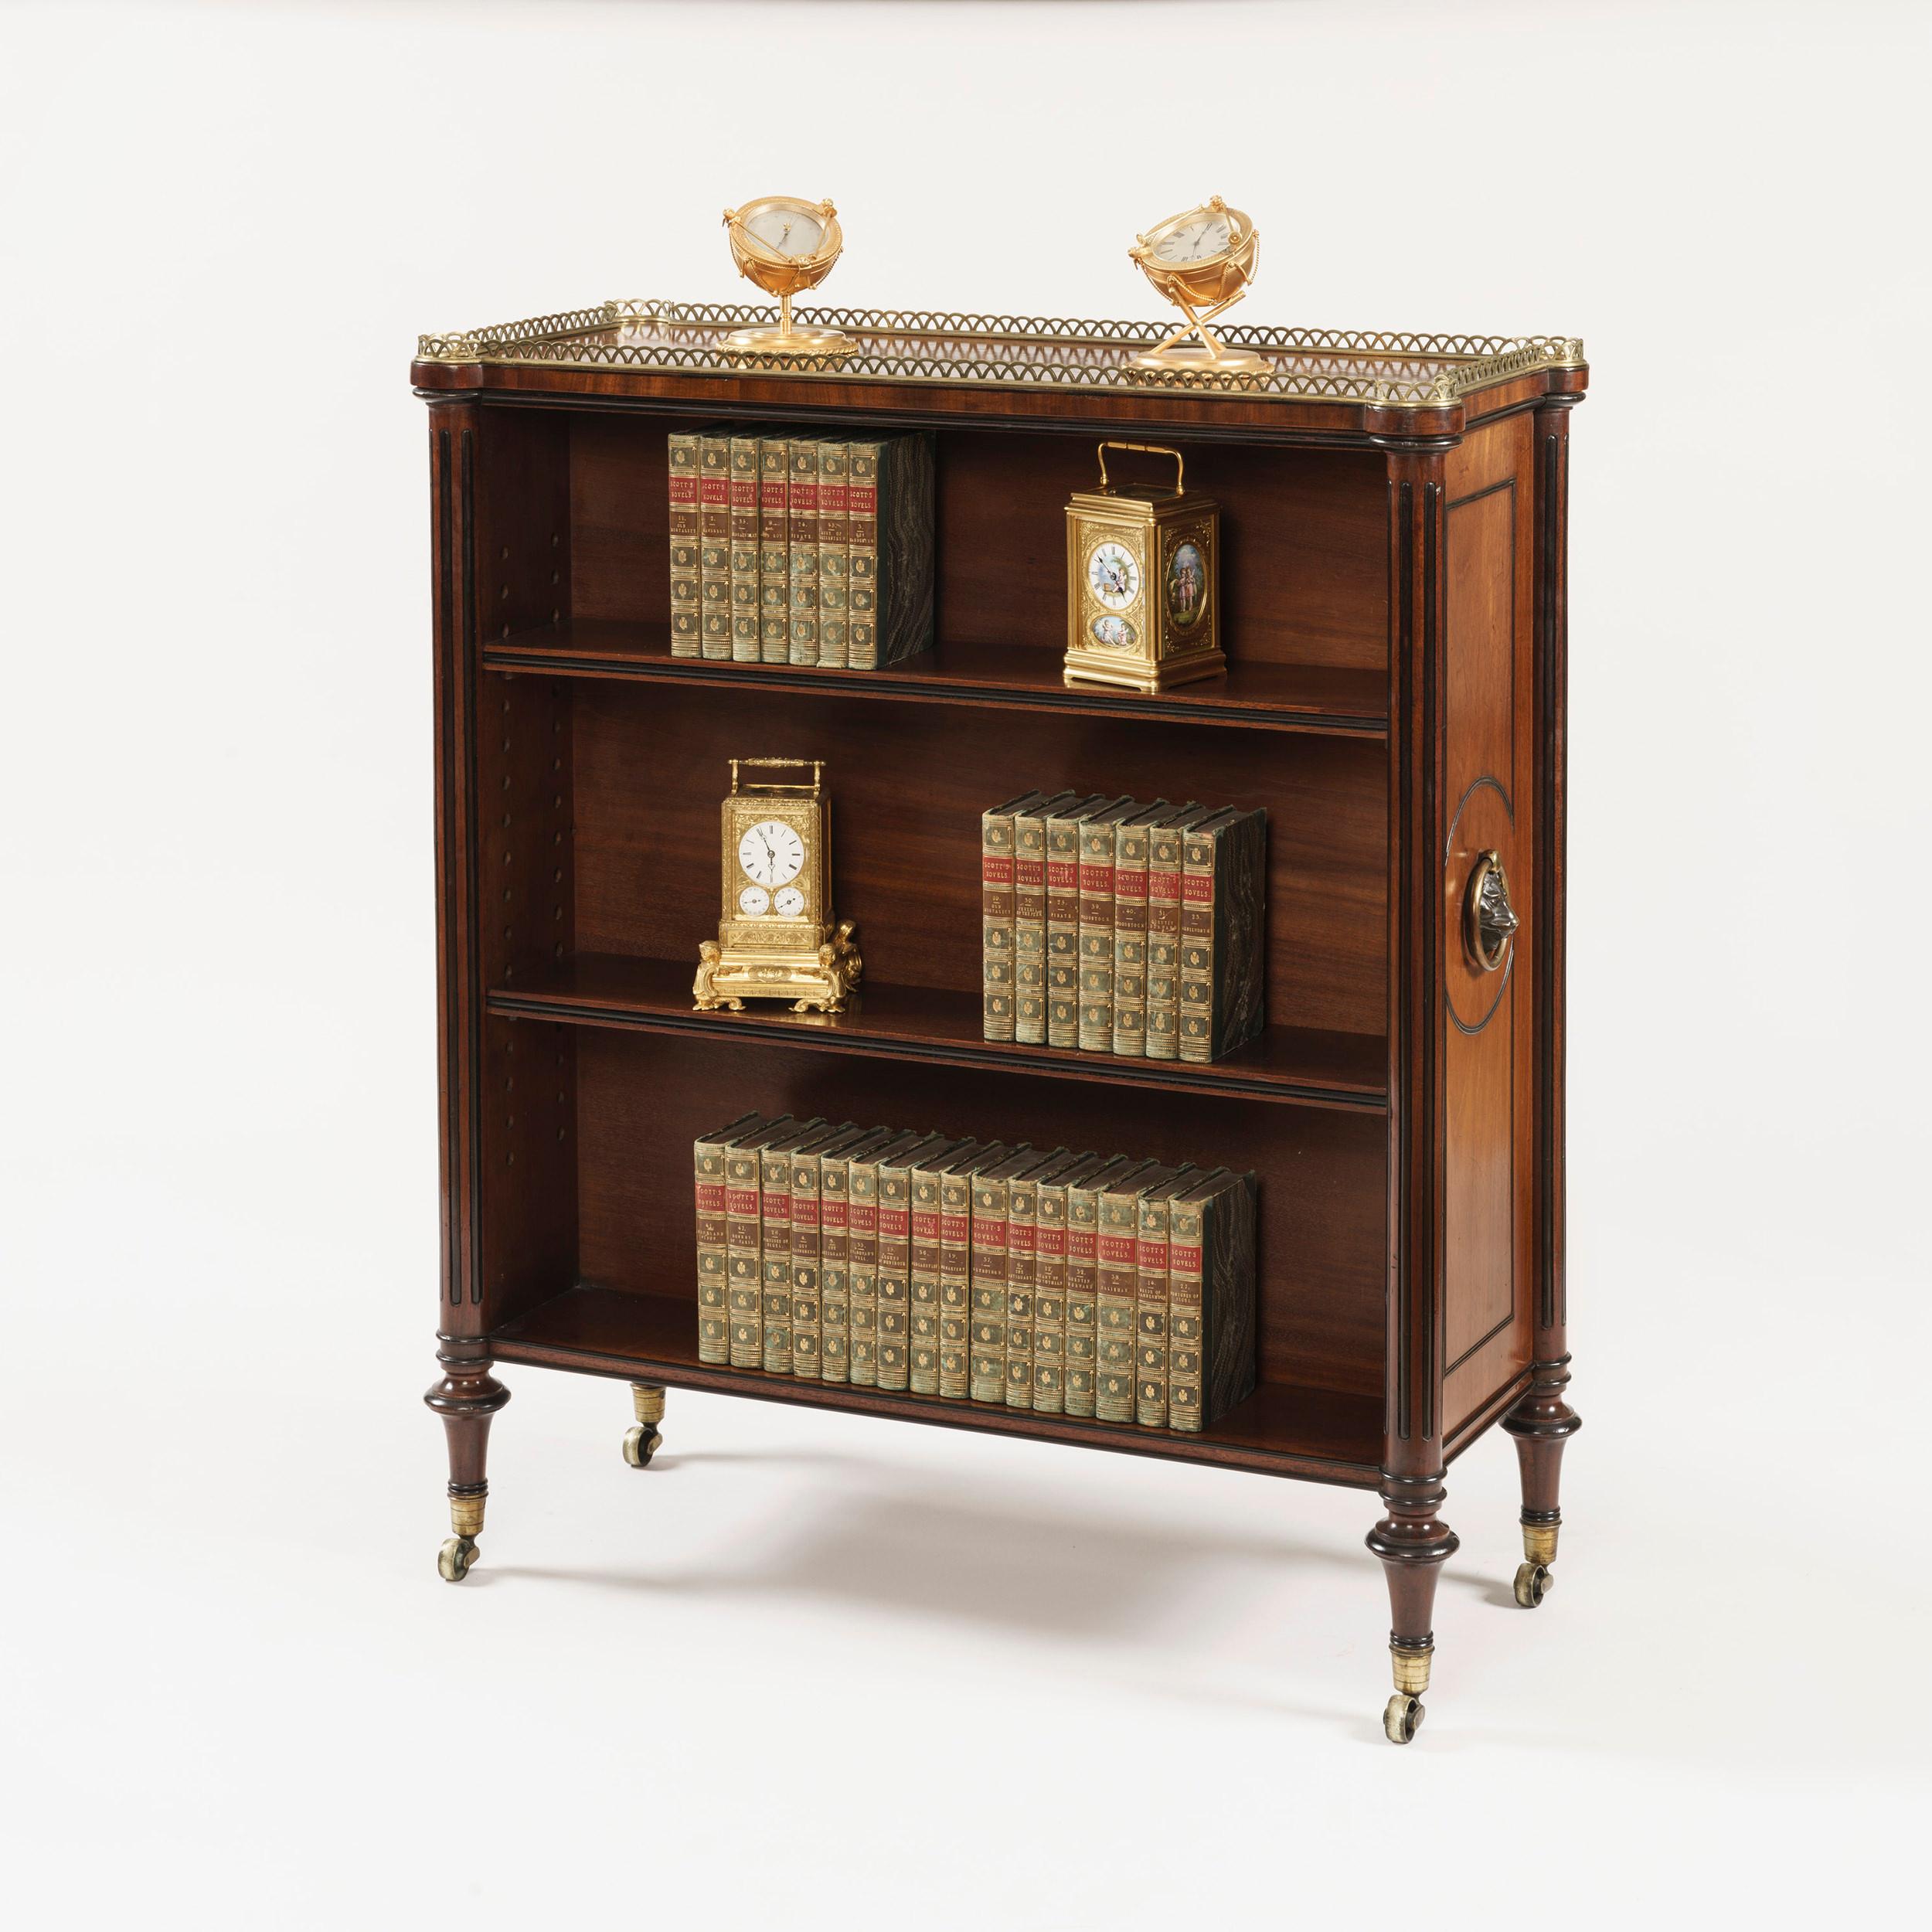 A Regency double-sided bookcase

Constructed in mahogany, with brass adornments; of freestanding form, rising from castor shod ‘cotton reel’ legs, with fluted columns at the angles, each side housing three shelves, and large circular lion’s head